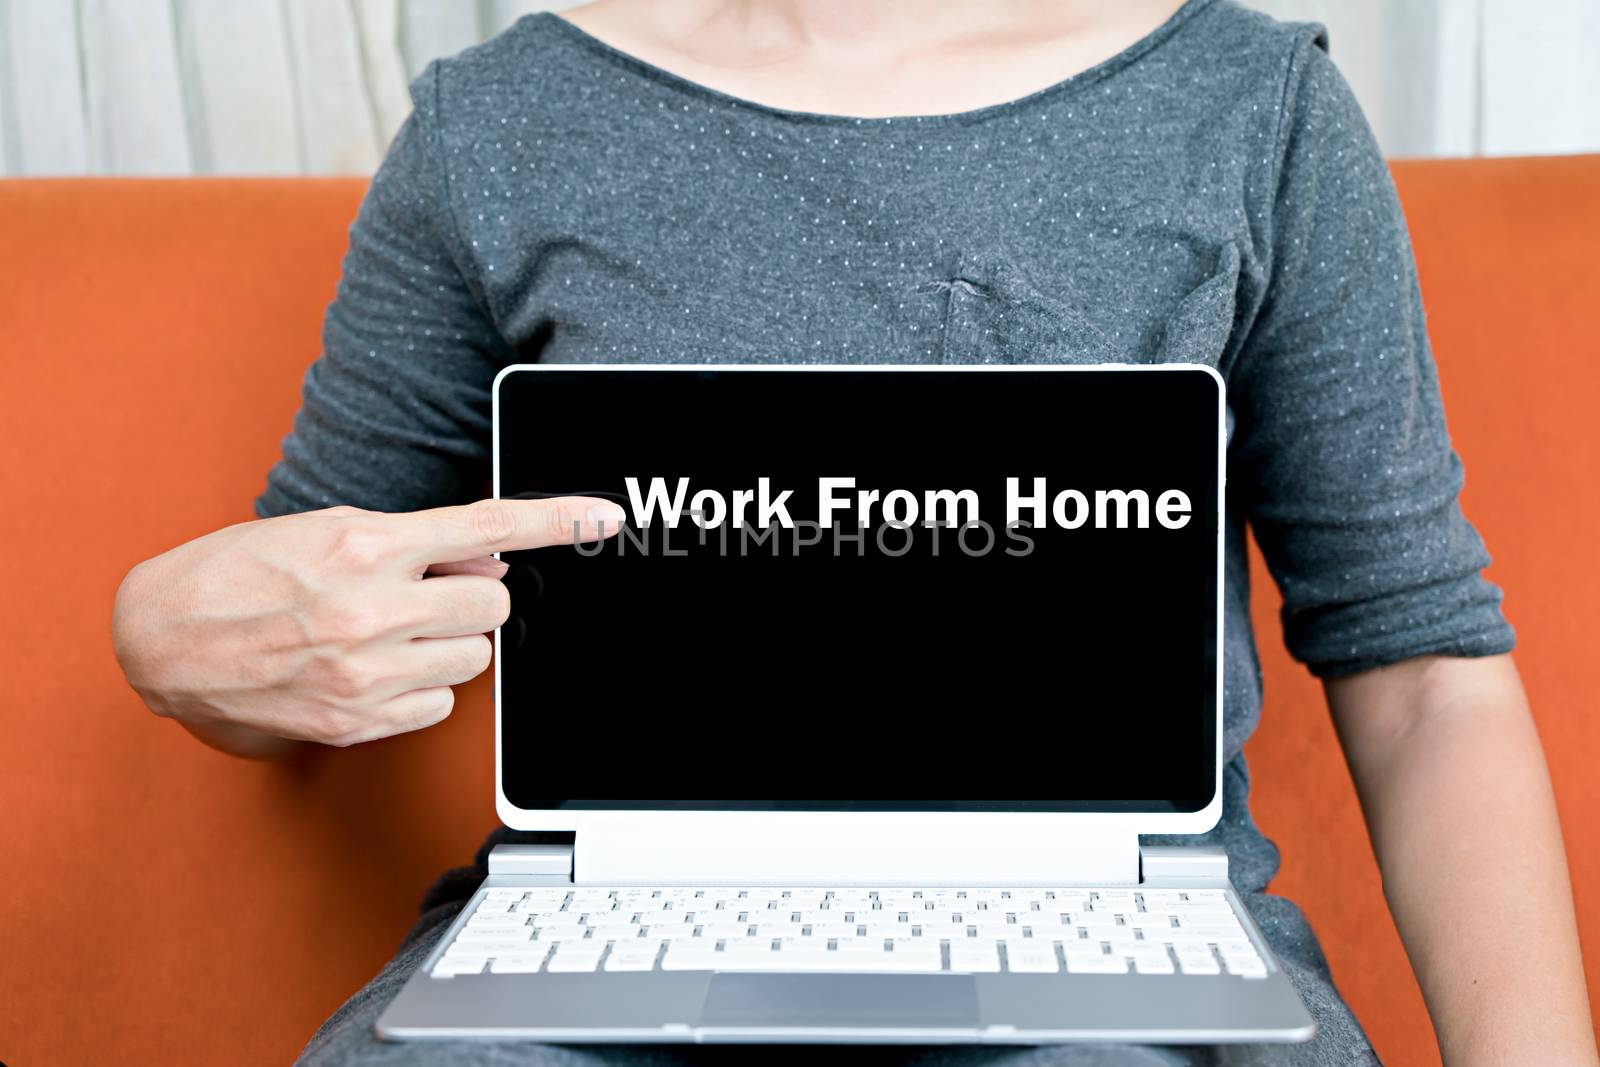 Hand choose work from home on laptop